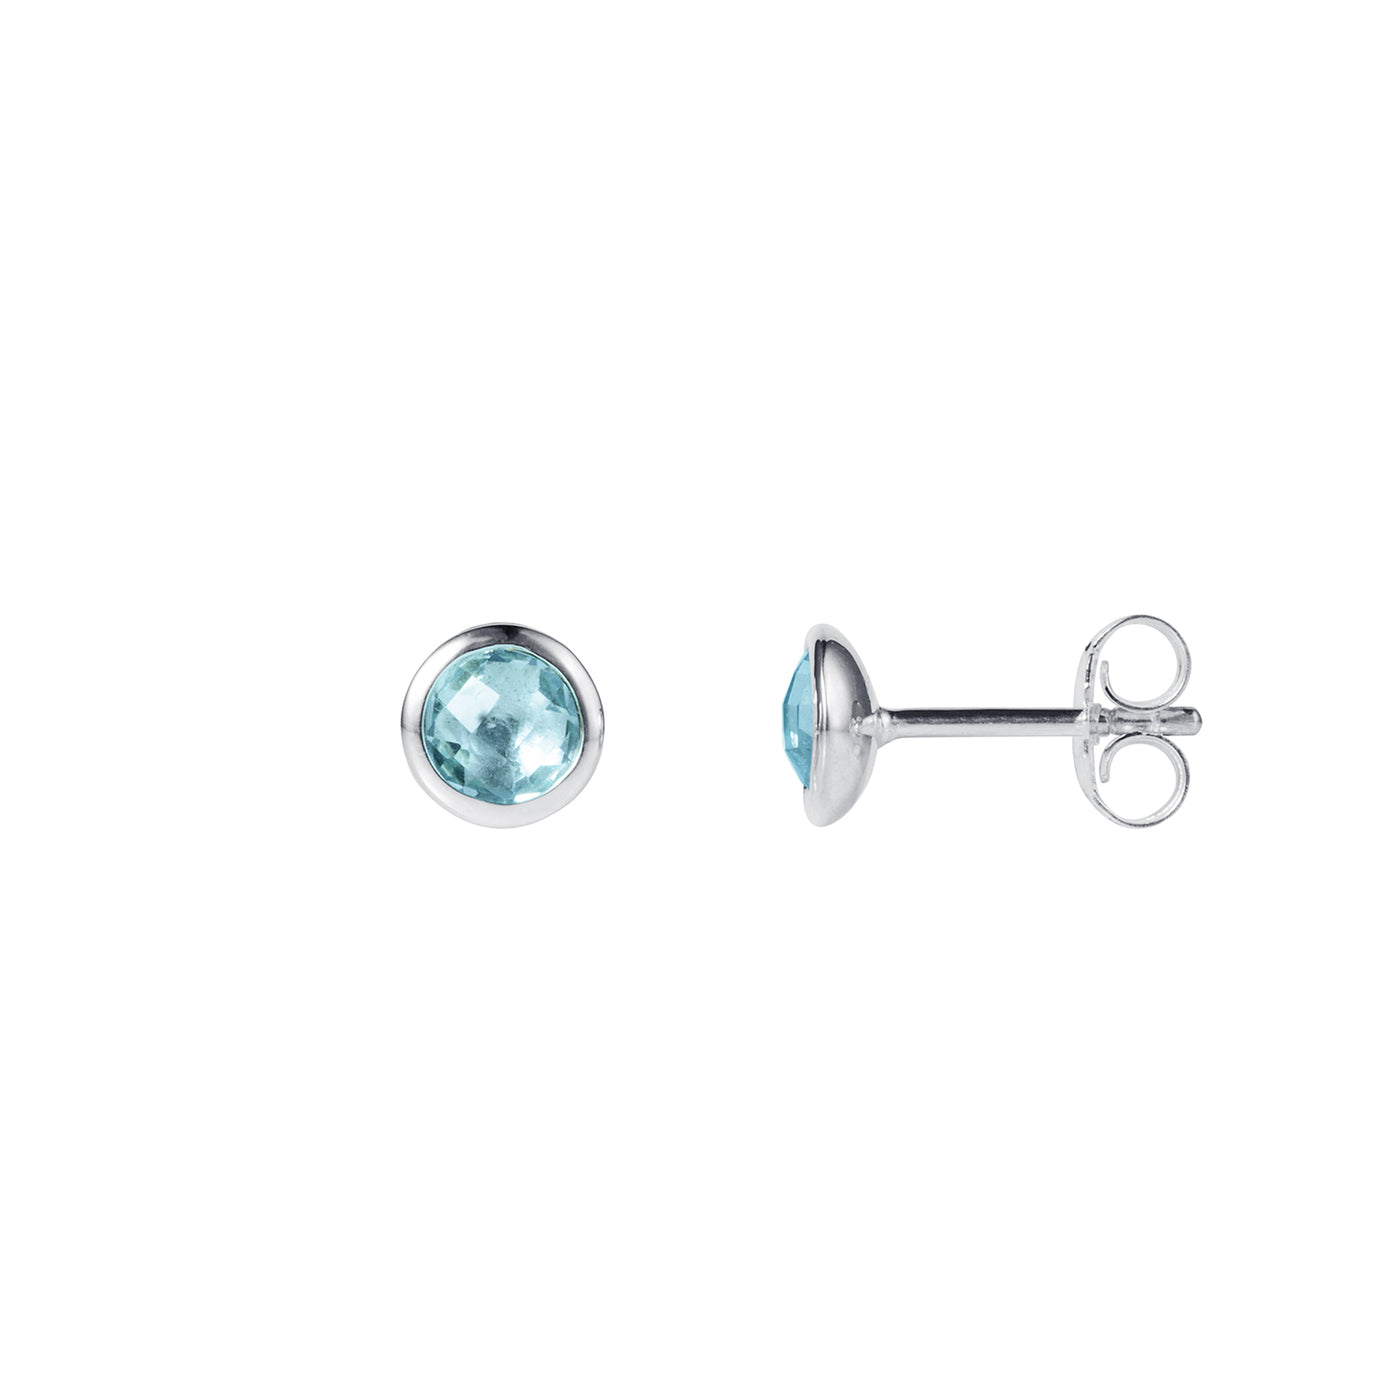 Photo of Silver and Blue Topaz Stud Earrings